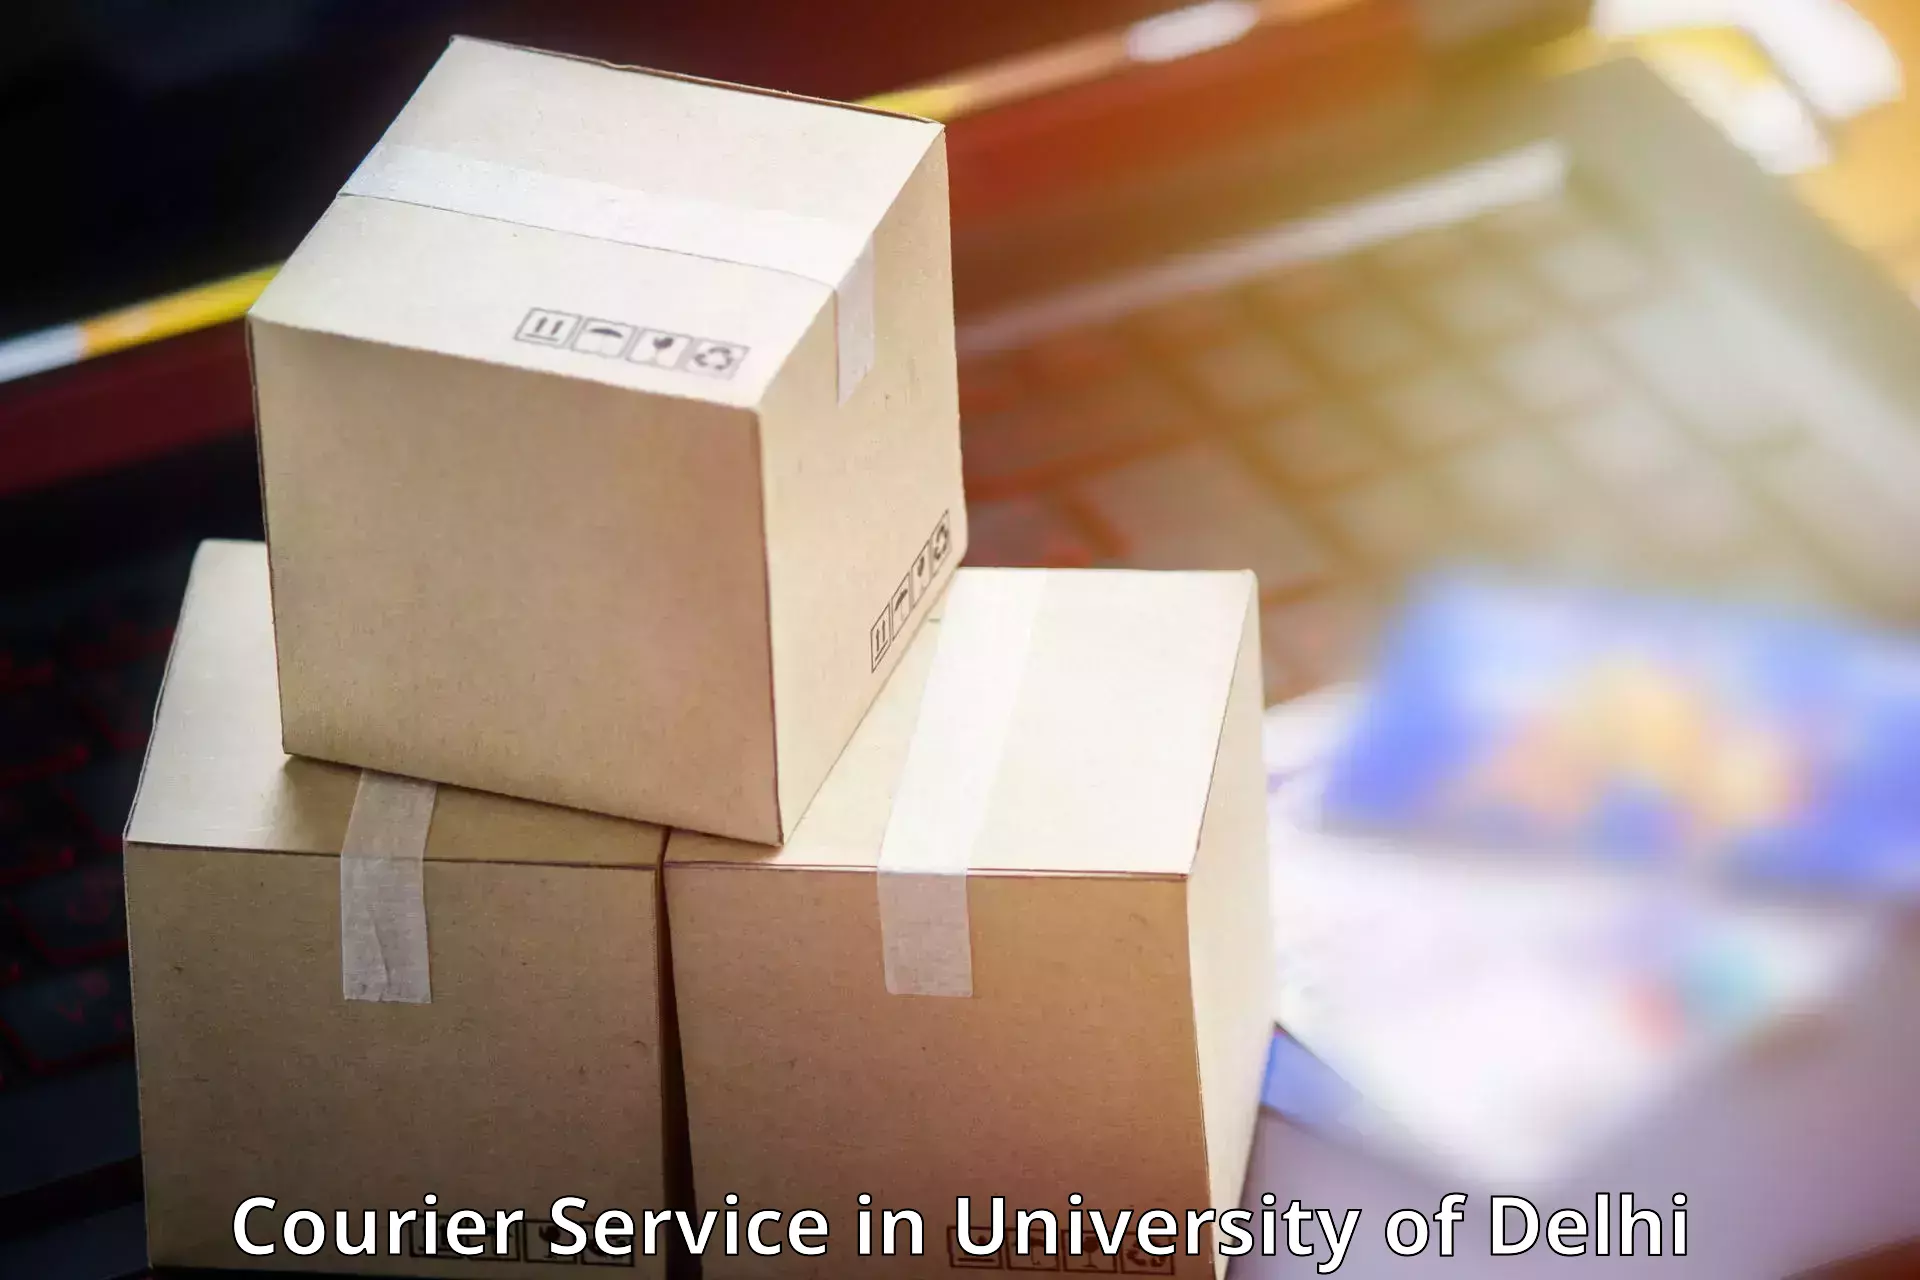 Efficient package consolidation in University of Delhi